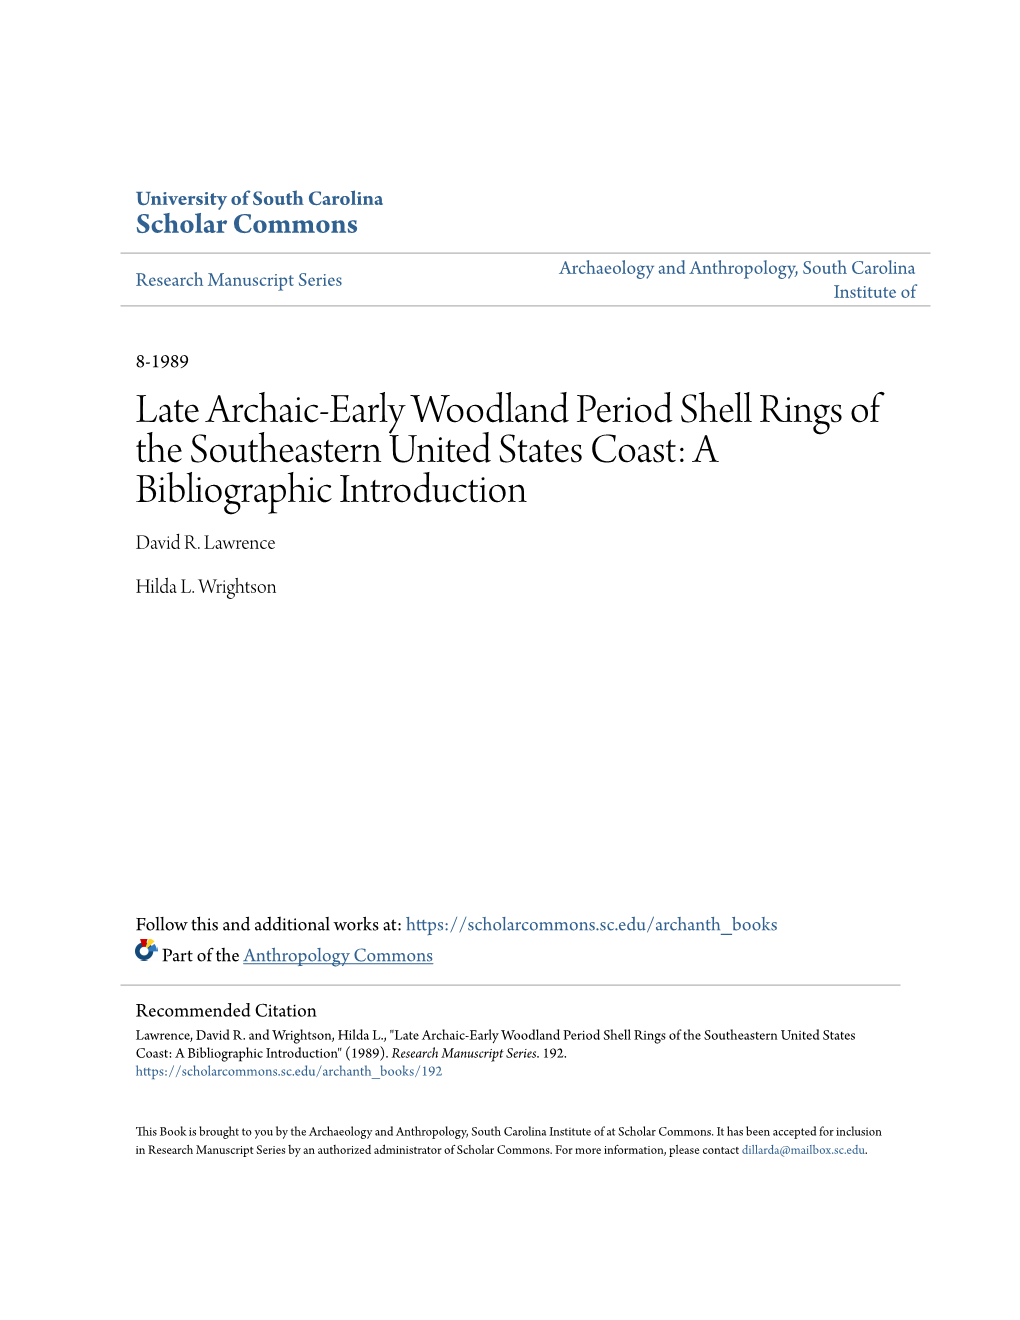 Late Archaic-Early Woodland Period Shell Rings of the Southeastern United States Coast: a Bibliographic Introduction David R